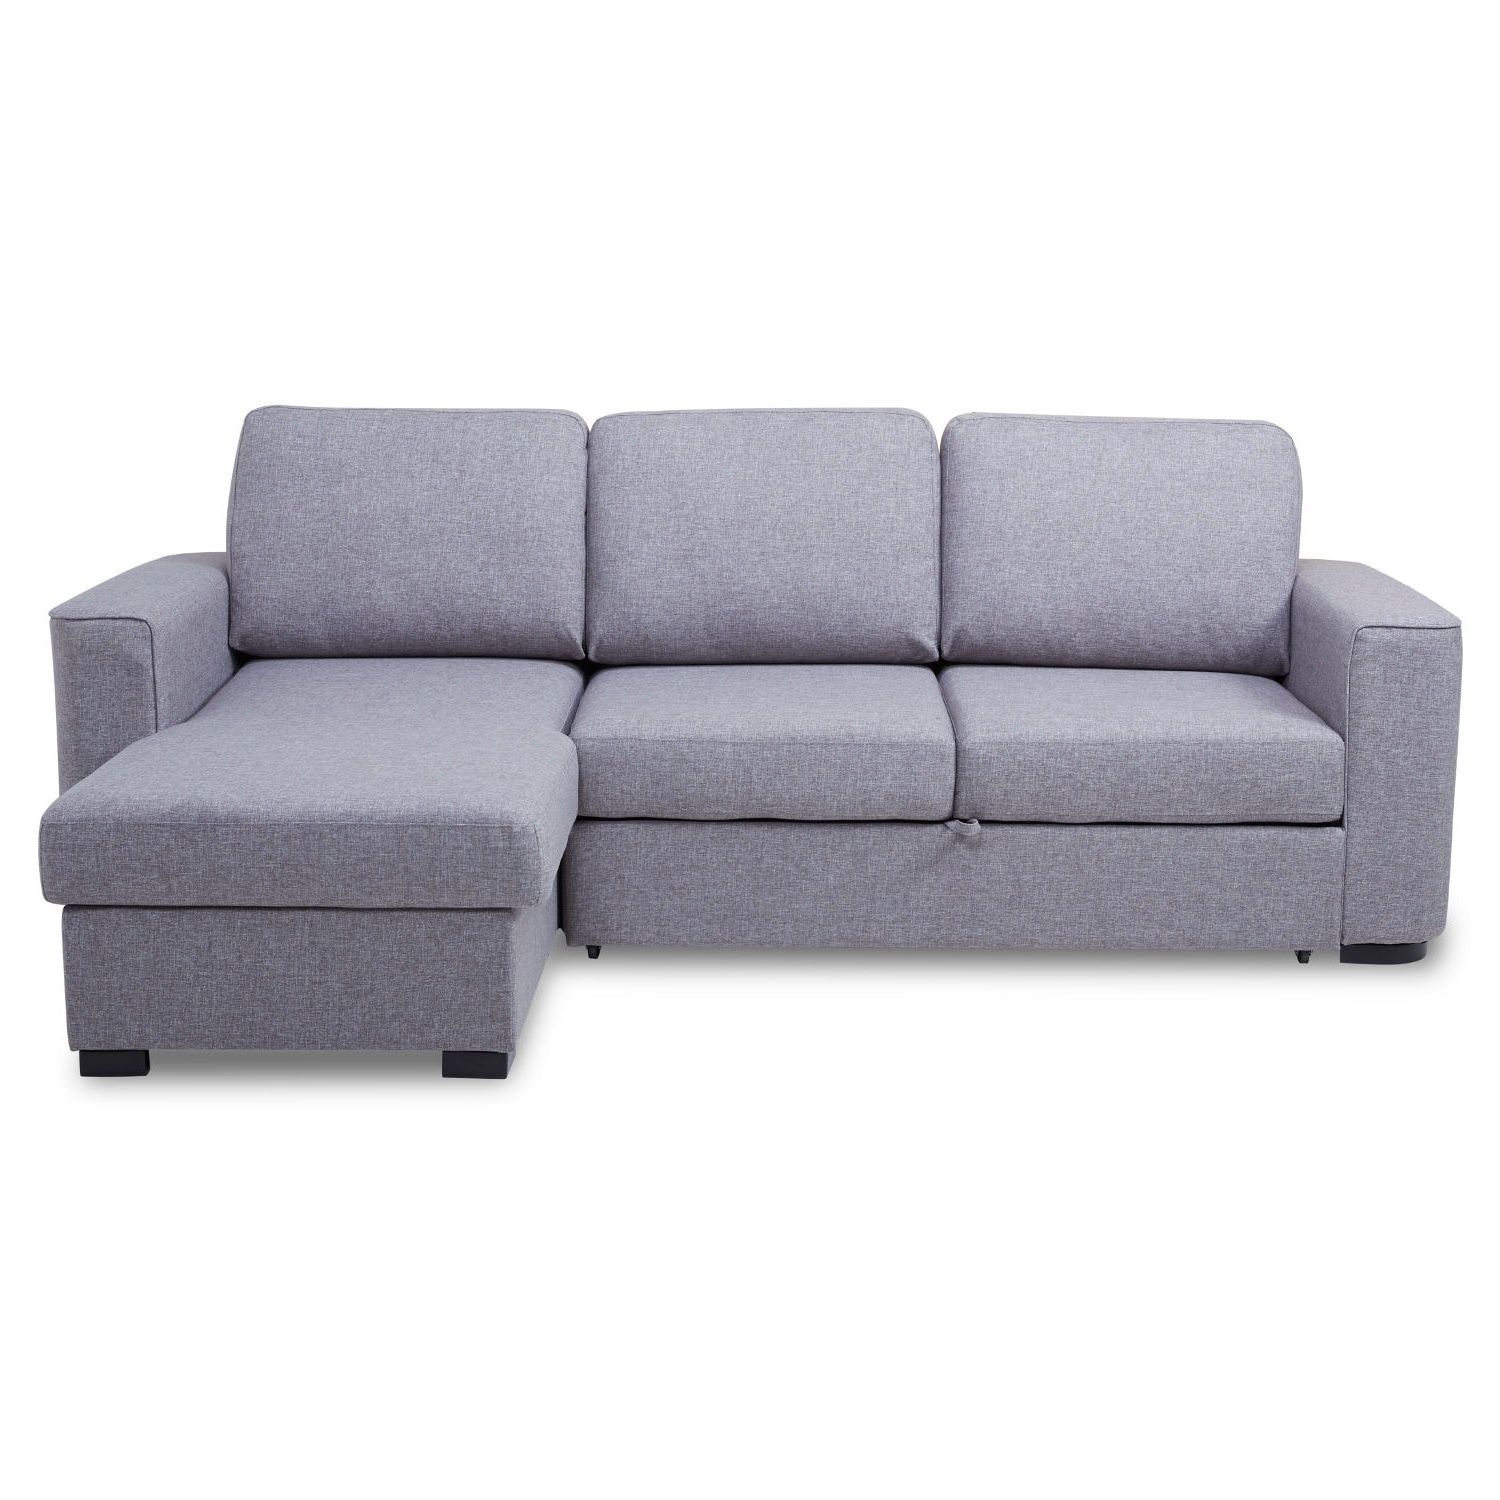 Most Recent Chaise Sofa Beds With Storage Within Ronny Fabric Corner Chaise Sofa Bed With Storage – Next Day (View 8 of 15)